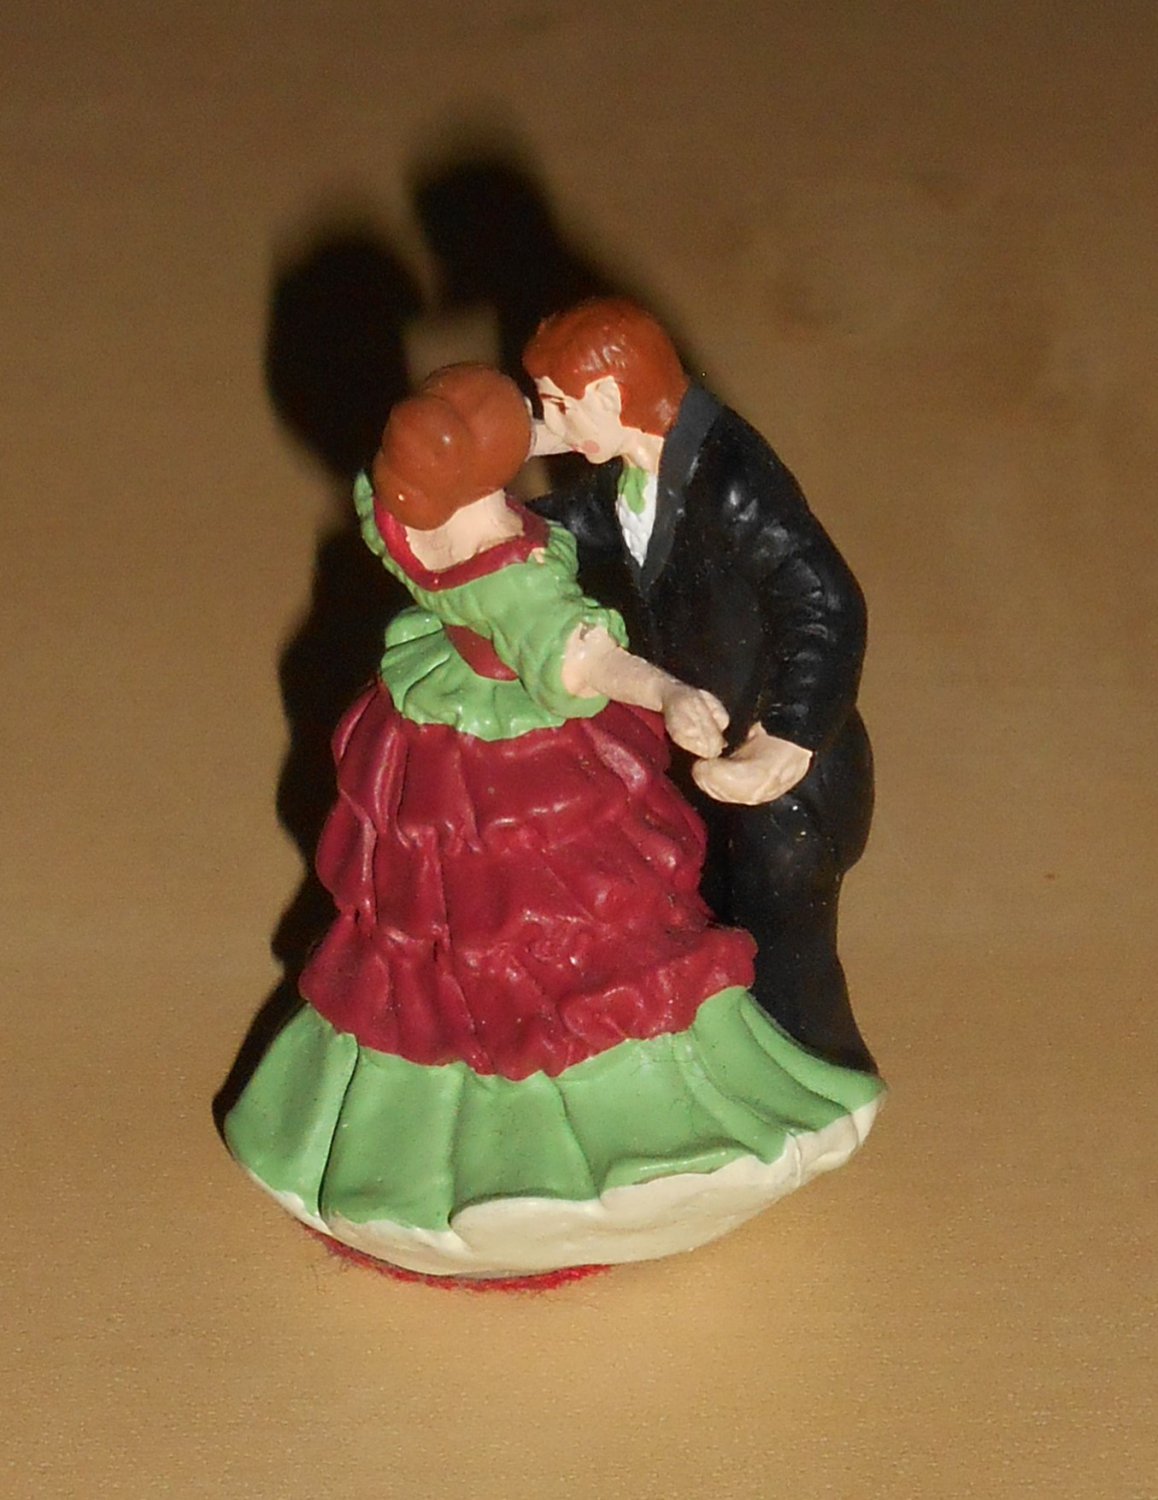 Red Lt Brown Hair Couple Figure Mr Christmas Holiday Waltz Ballroom Dancers Dancing Replacement Part